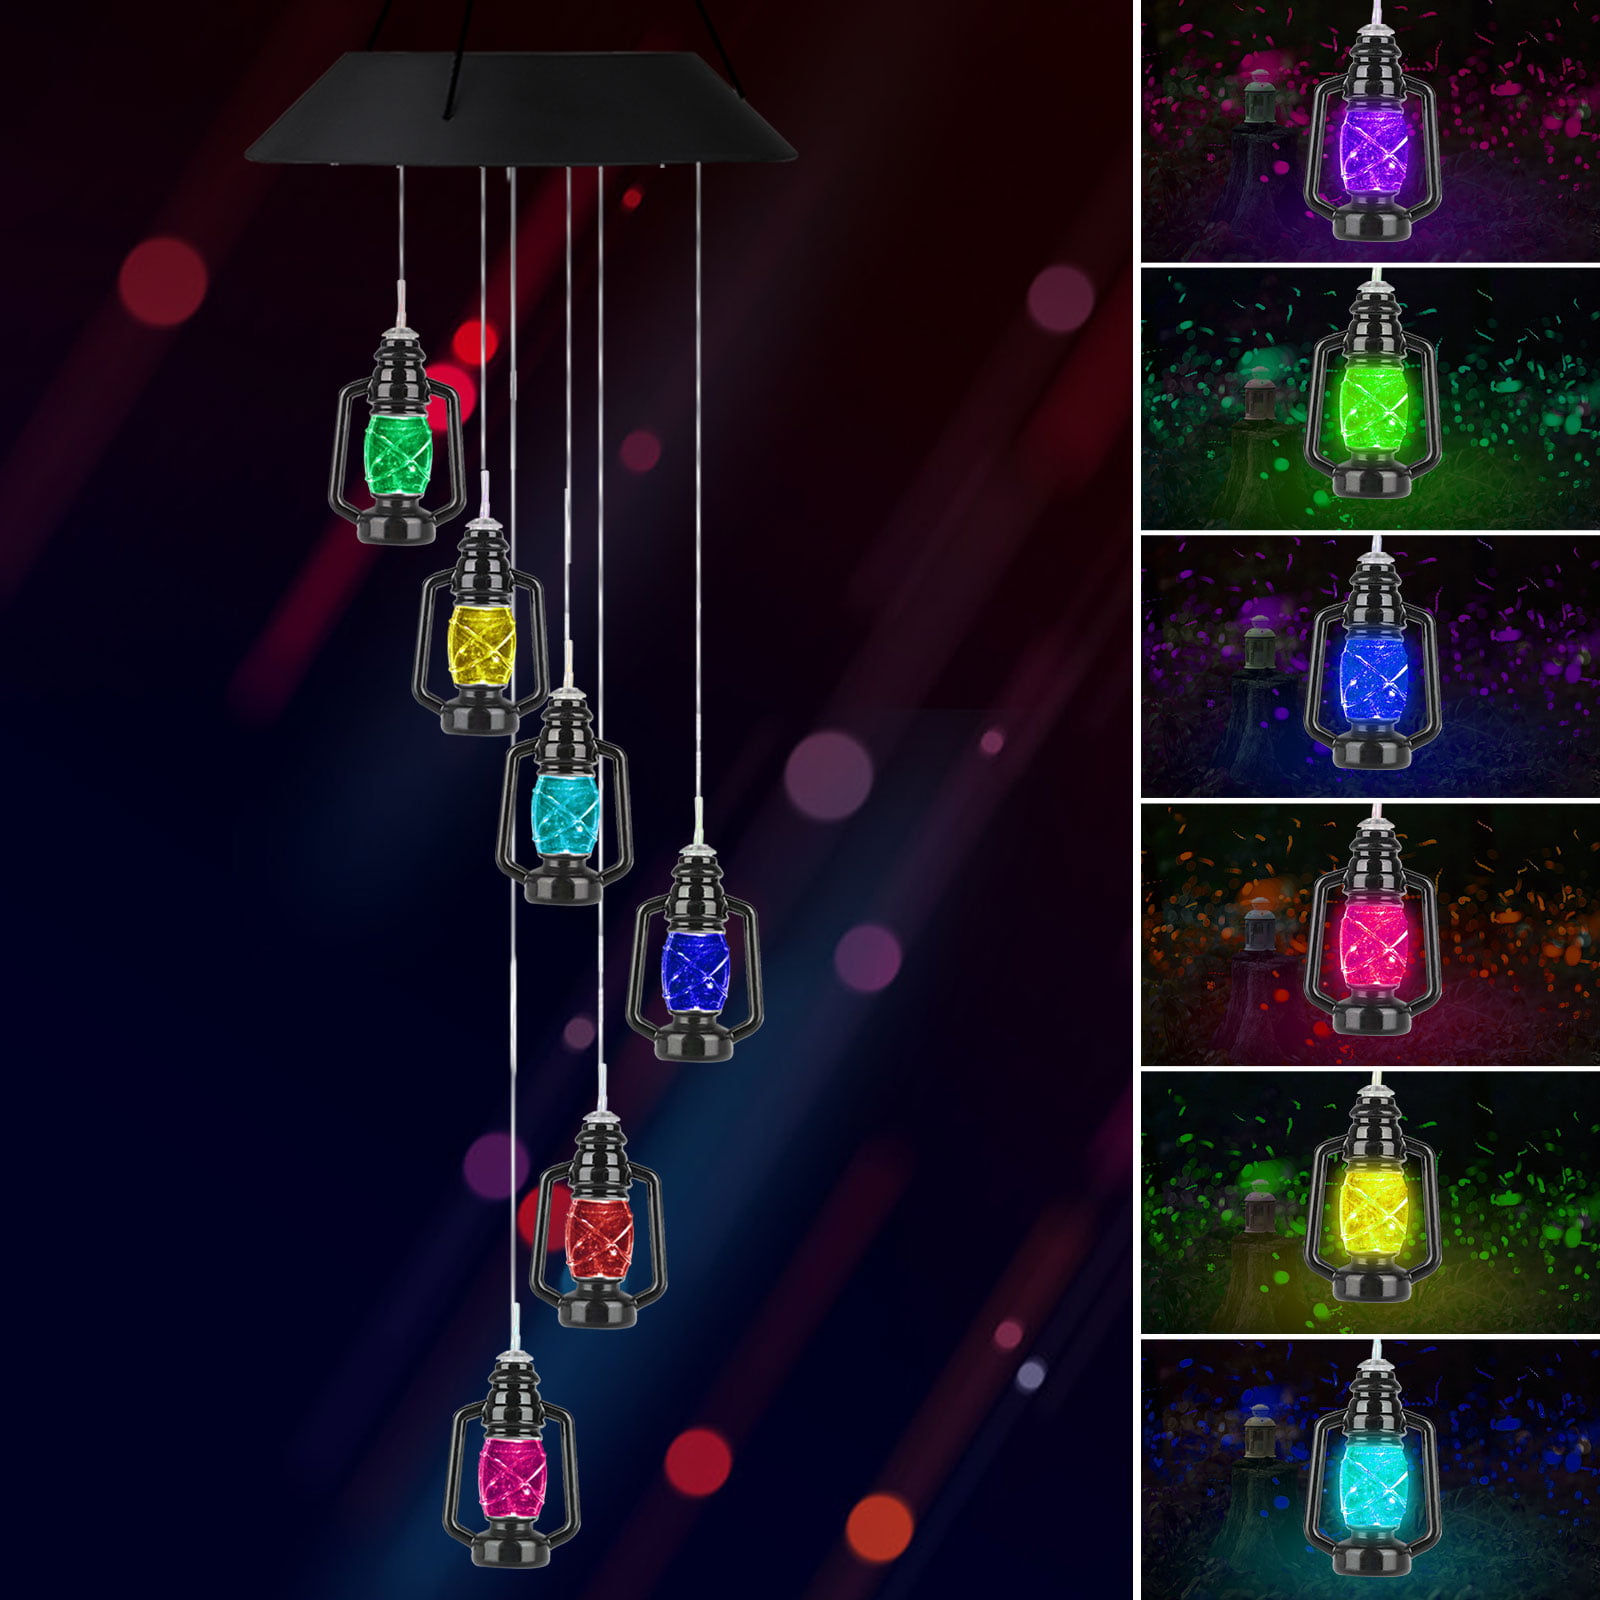 EEEKit Solar Wind Chimes Lights 7 Colors Changing Crystal Ball Wind Chime Outdoor/Indoor with Bells Waterproof Hanging Decorative LED Solar Lights for Home Bedroom Outdoor Garden Yard Decor